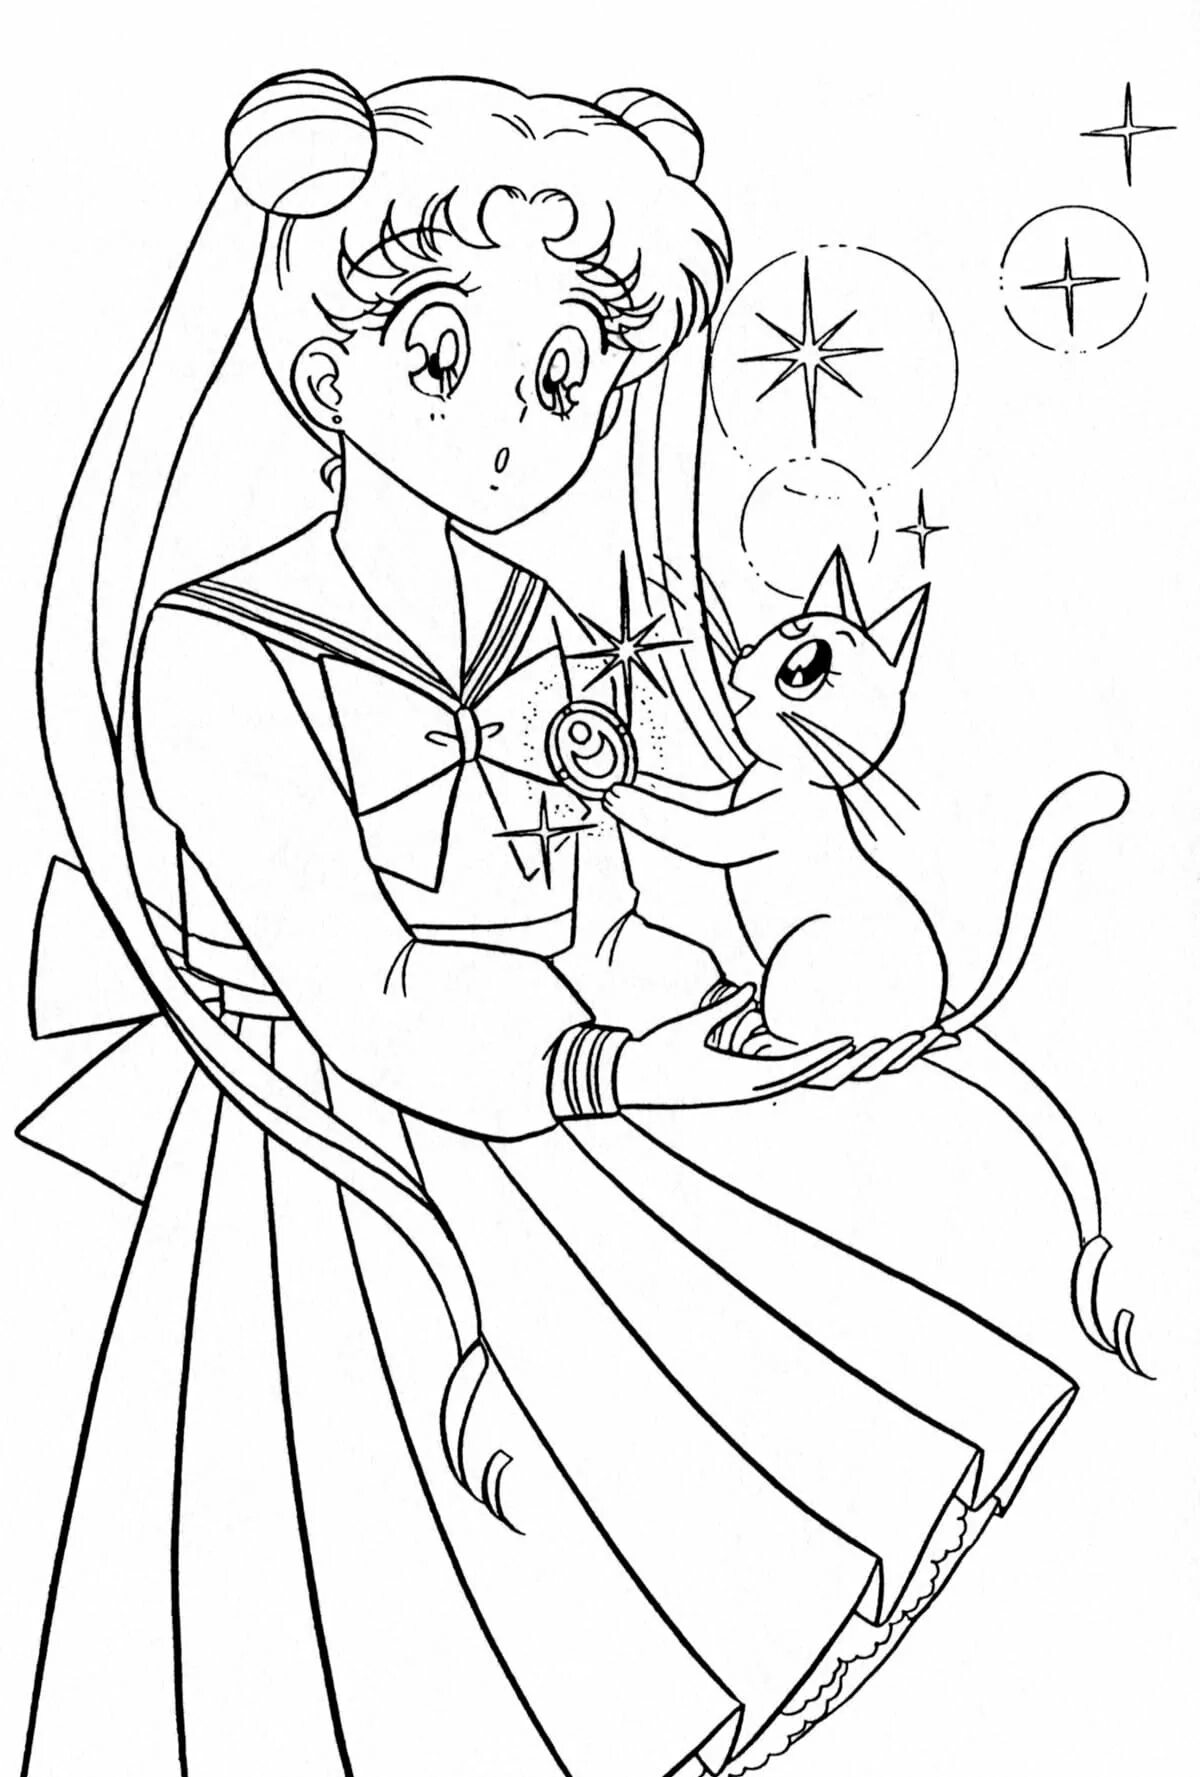 Peace coloring for girls sailor moon